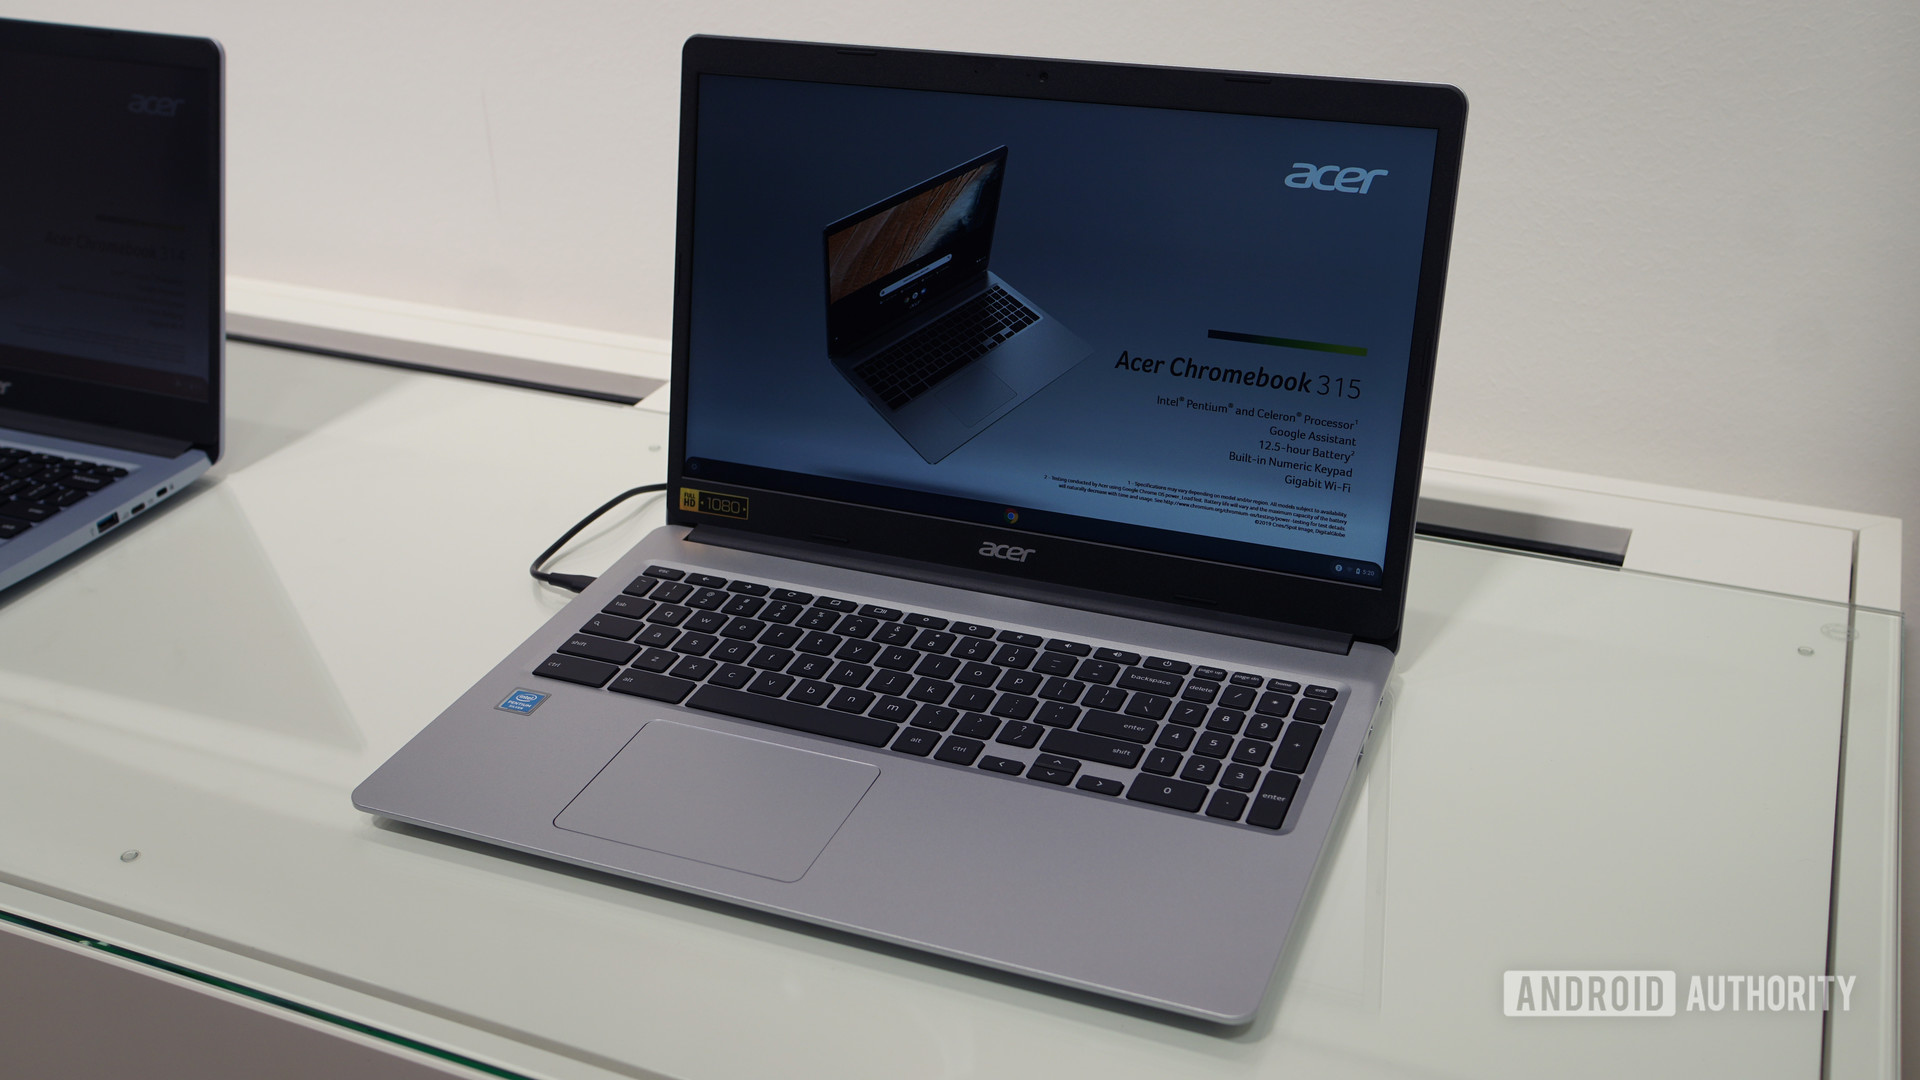 Acer Chromebook 315 display and keyboard